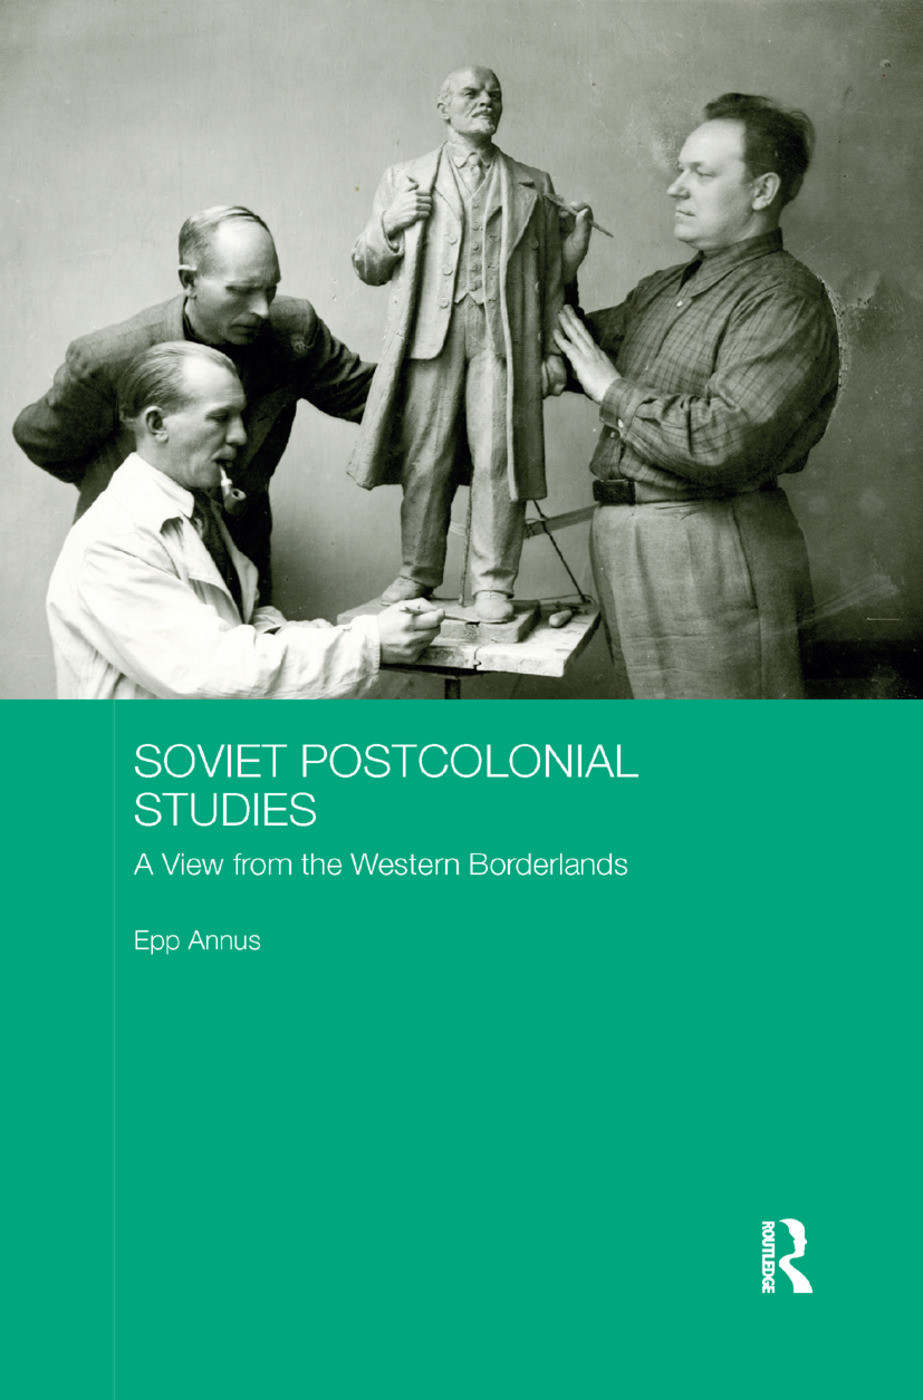 Soviet Postcolonial Studies. A View from the Western Borderlands